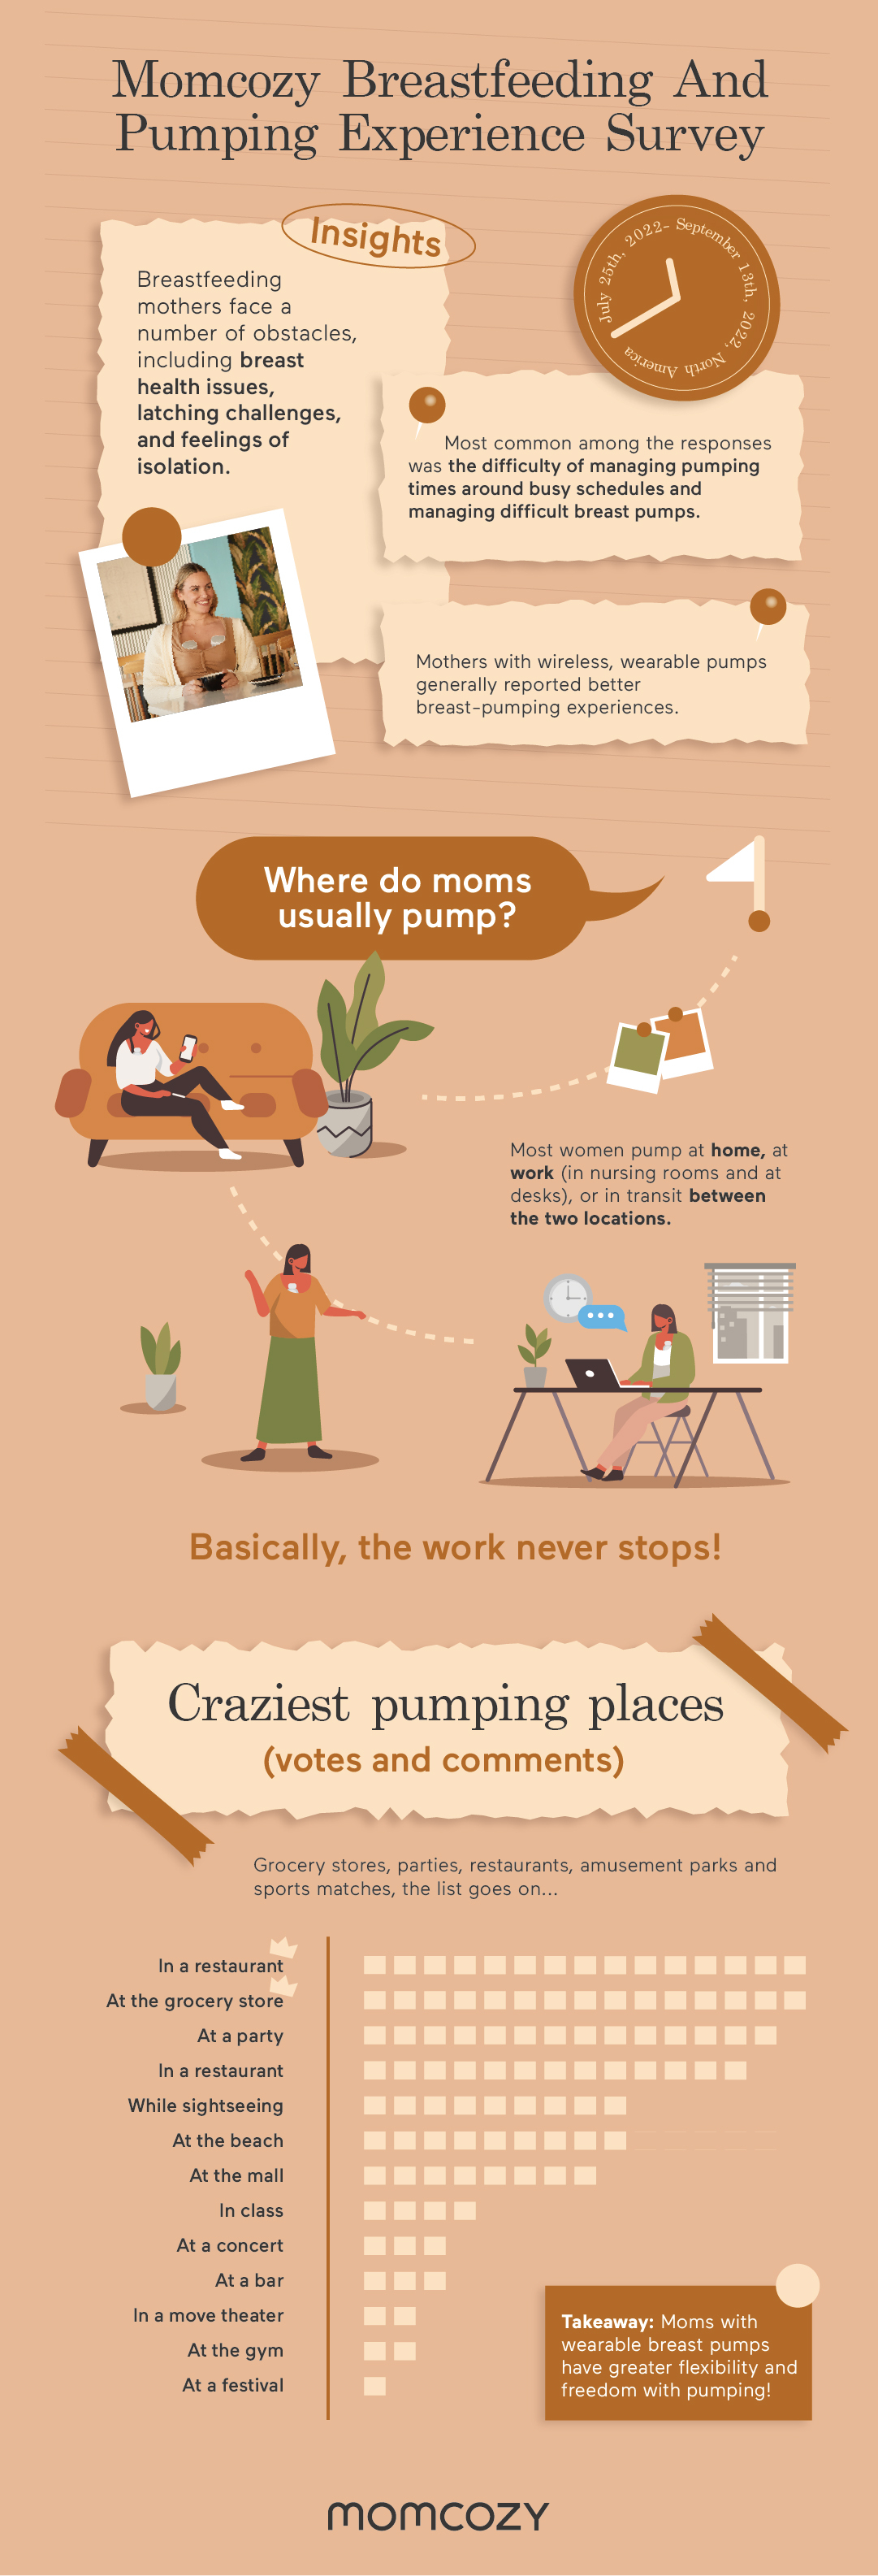 Momcozy Survey Finds Moms Face Biggest Challenges of Time and